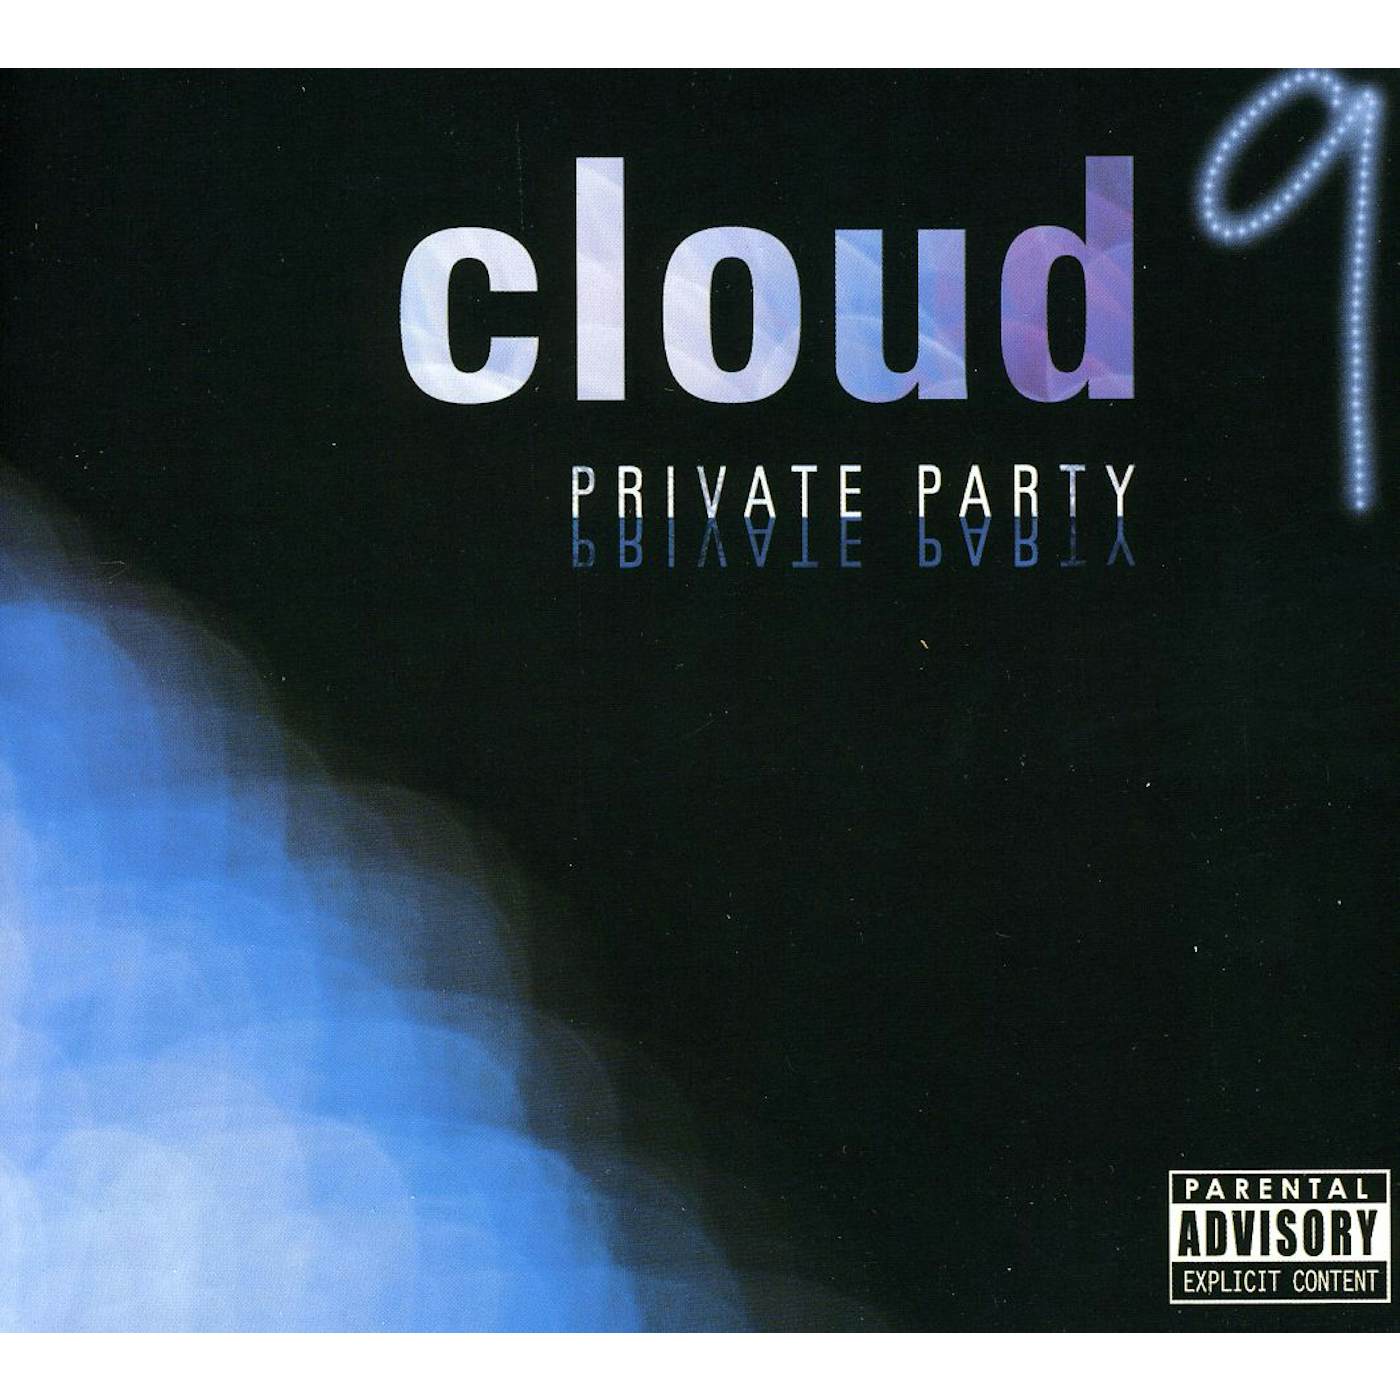 Cloud 9 PRIVATE PARTY CD